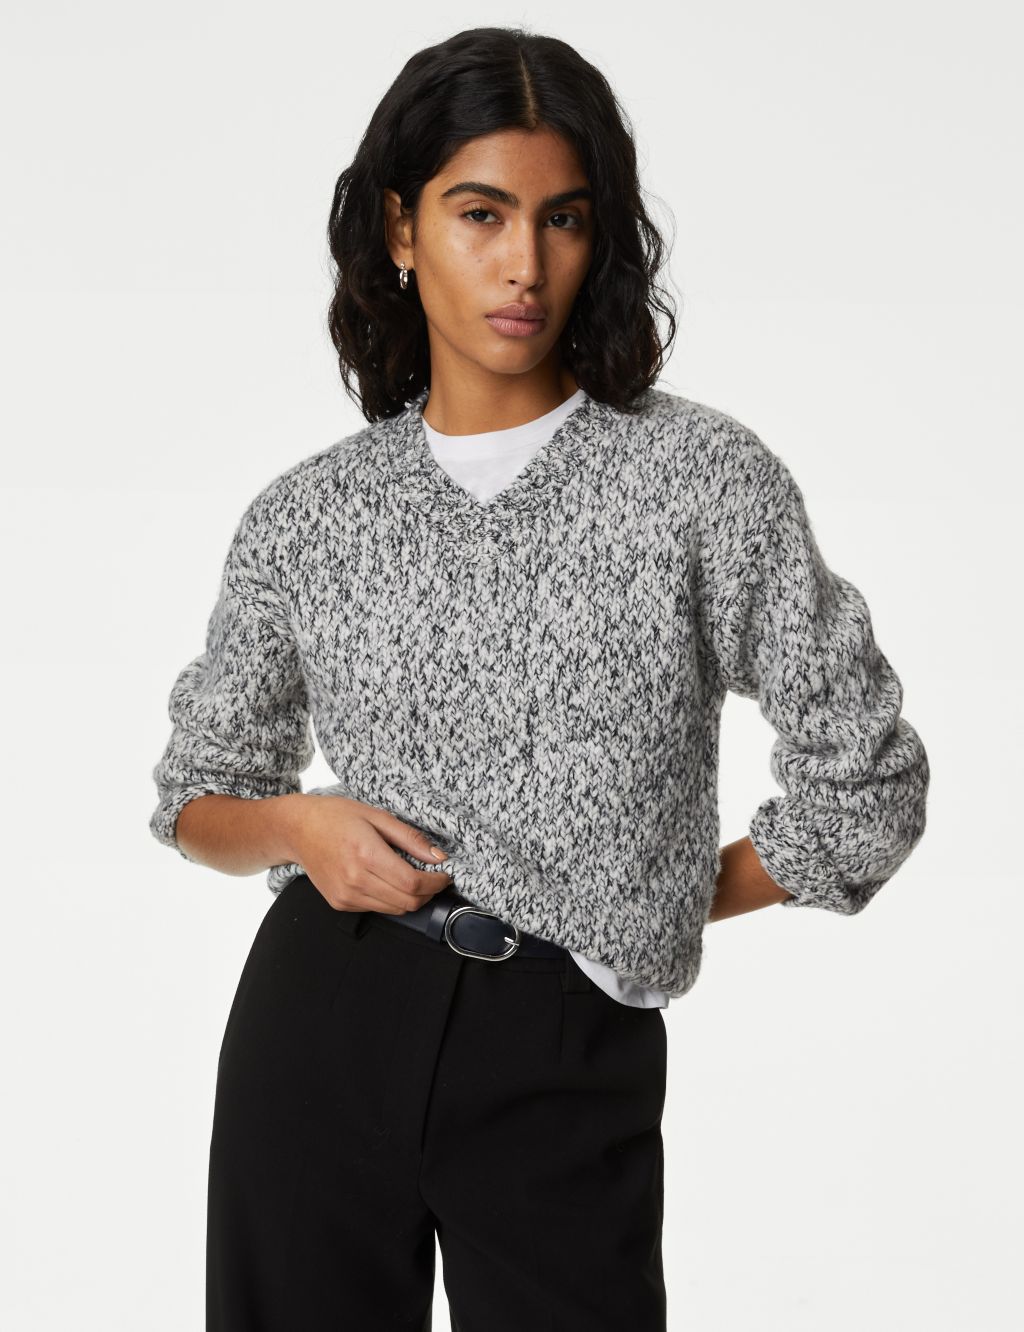 Textured V-Neck Jumper with Wool image 4